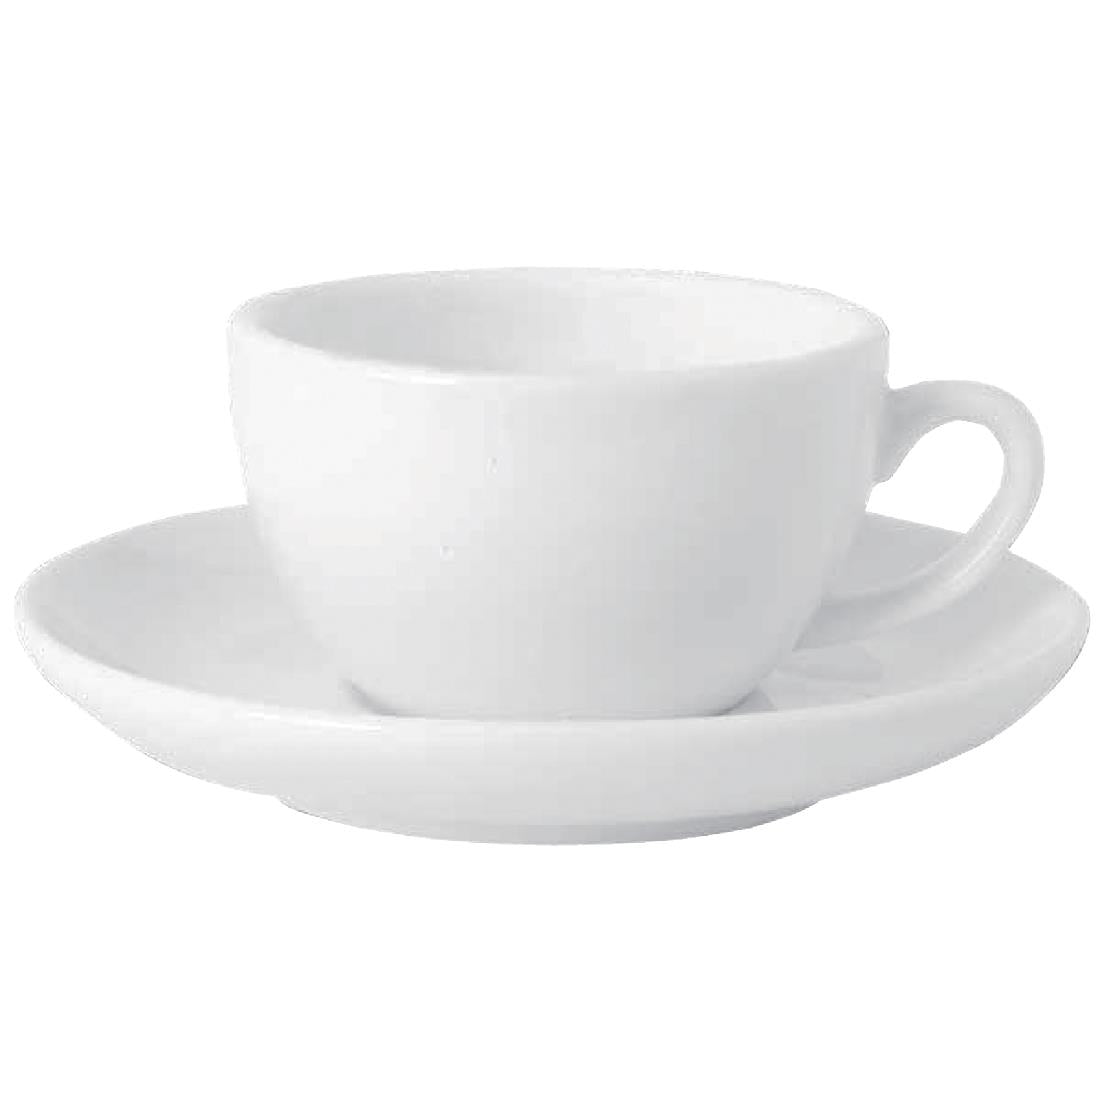 CG022 Royal Porcelain Classic White Breakfast Cups 300ml (Pack of 12)